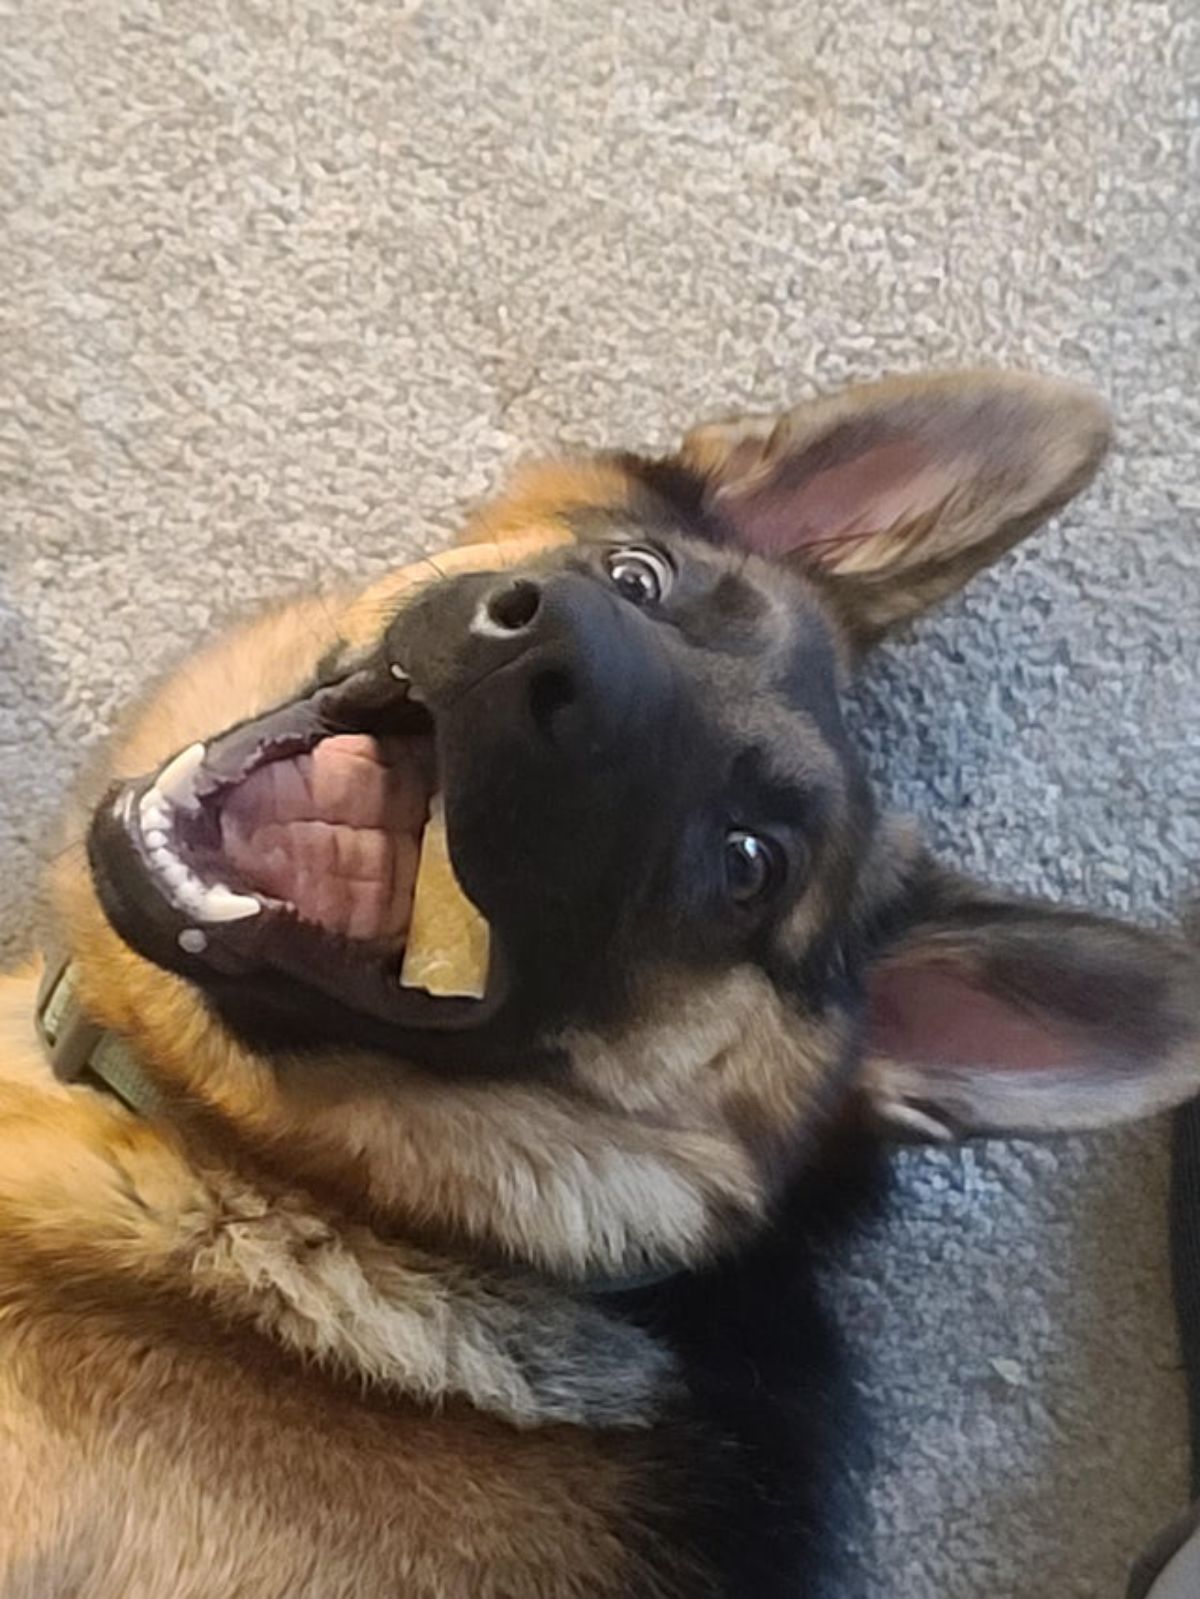 german shepherd on the floor with the mouth open and some cheese in its mouth